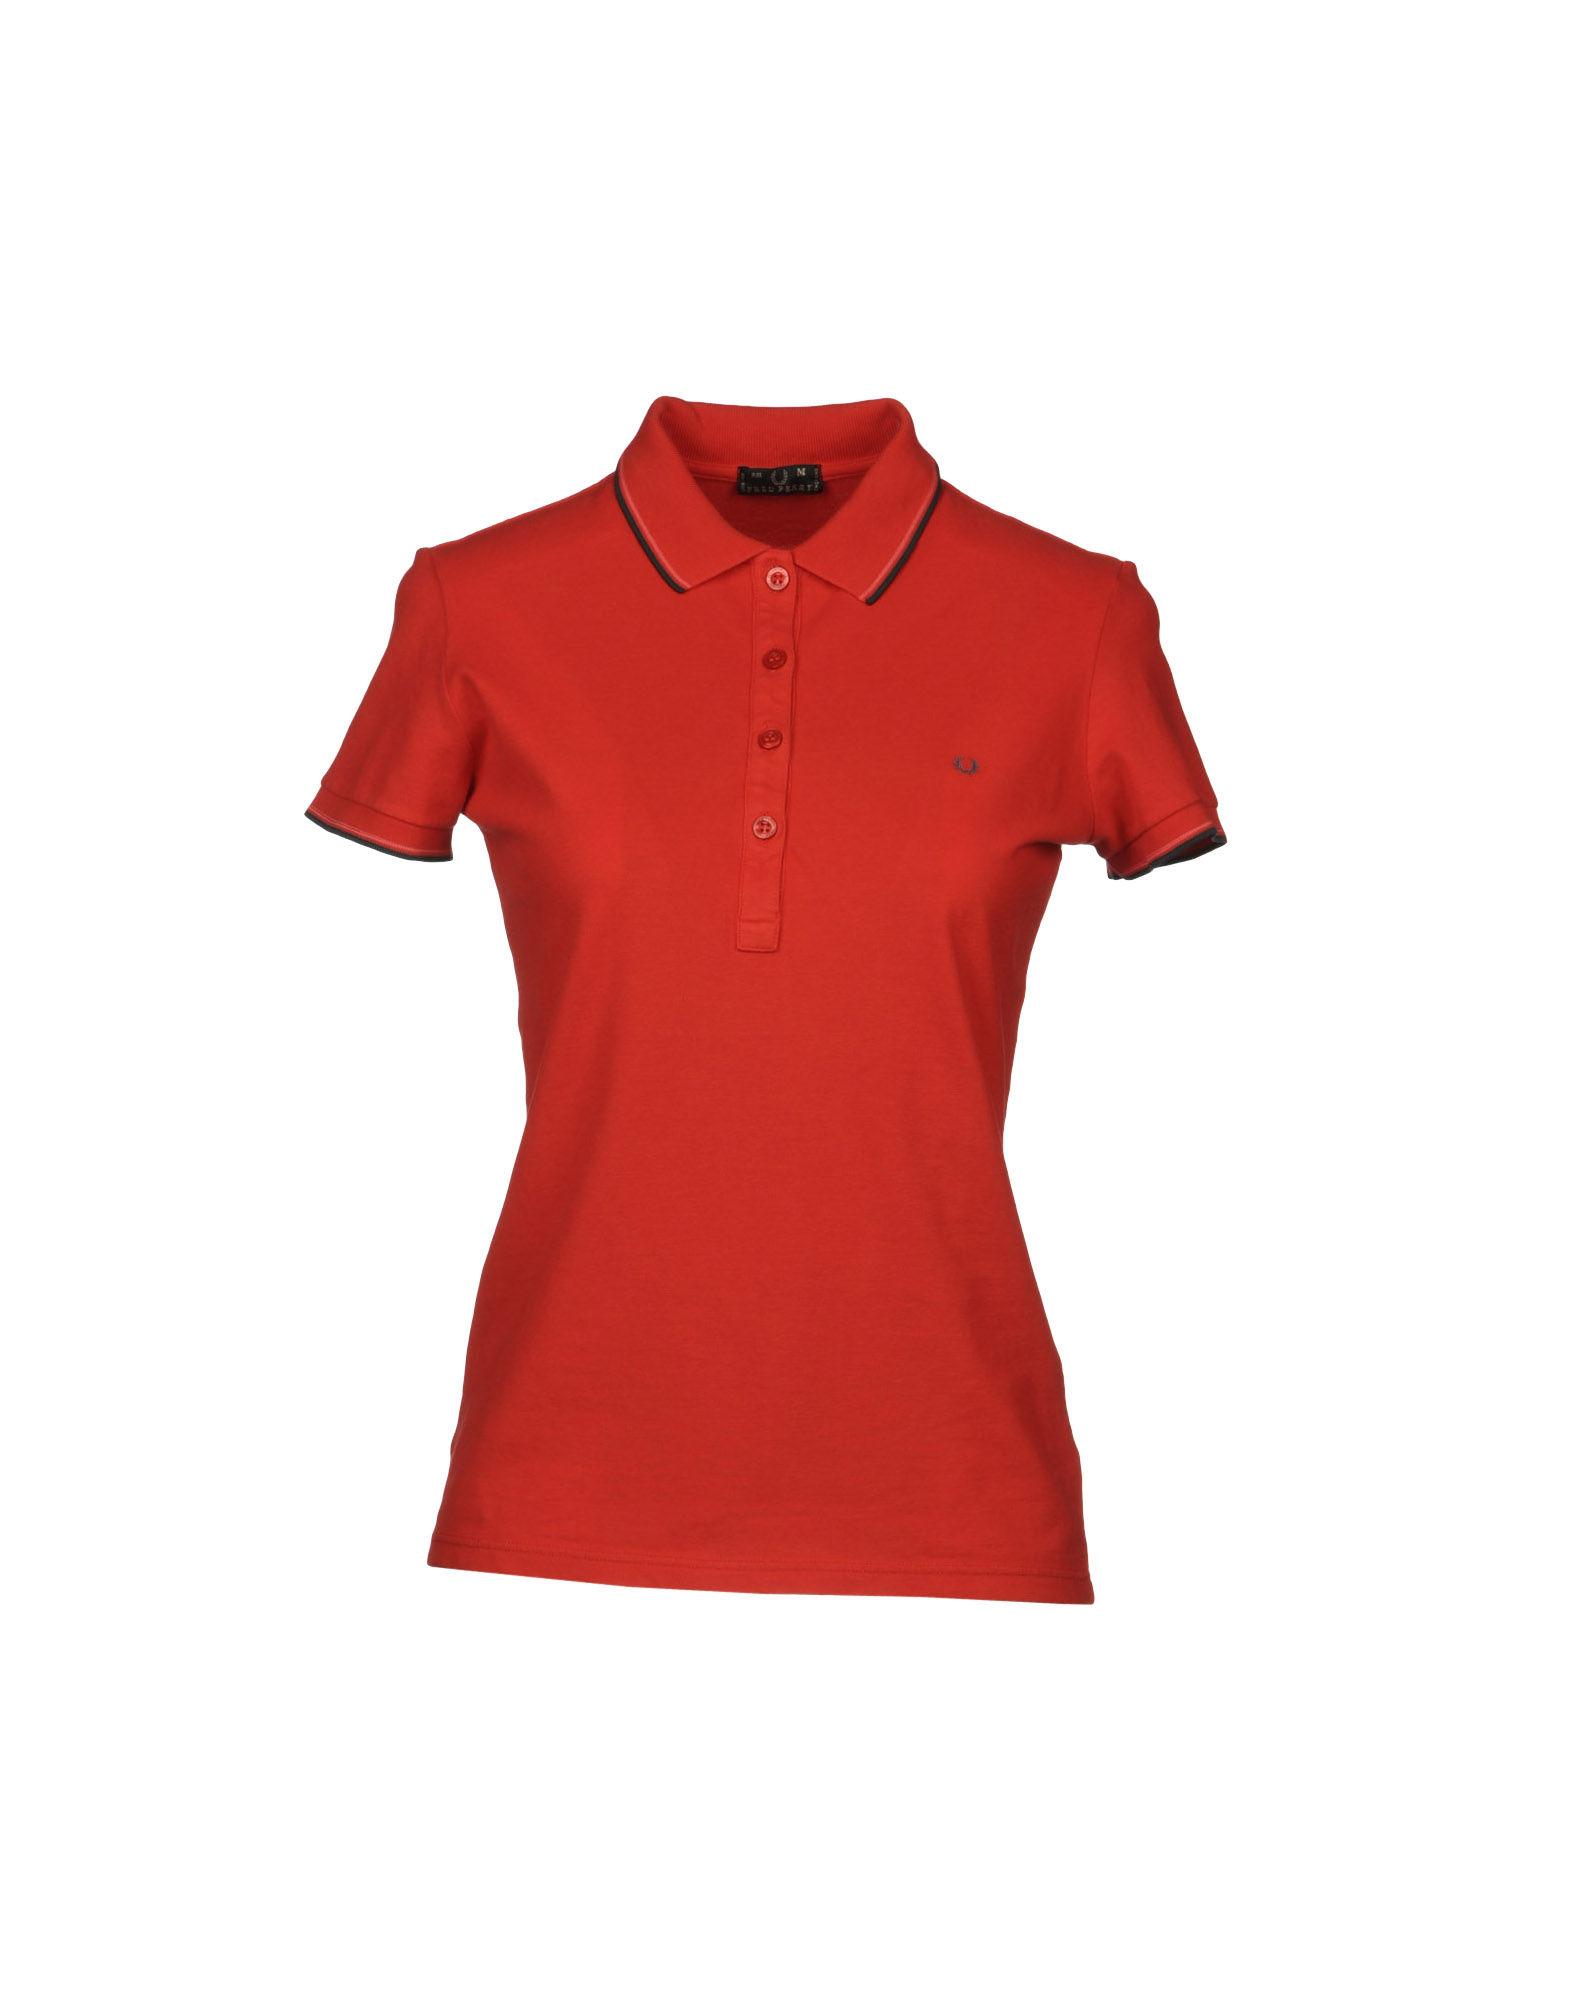 Foto fred perry polos
 foto 93563